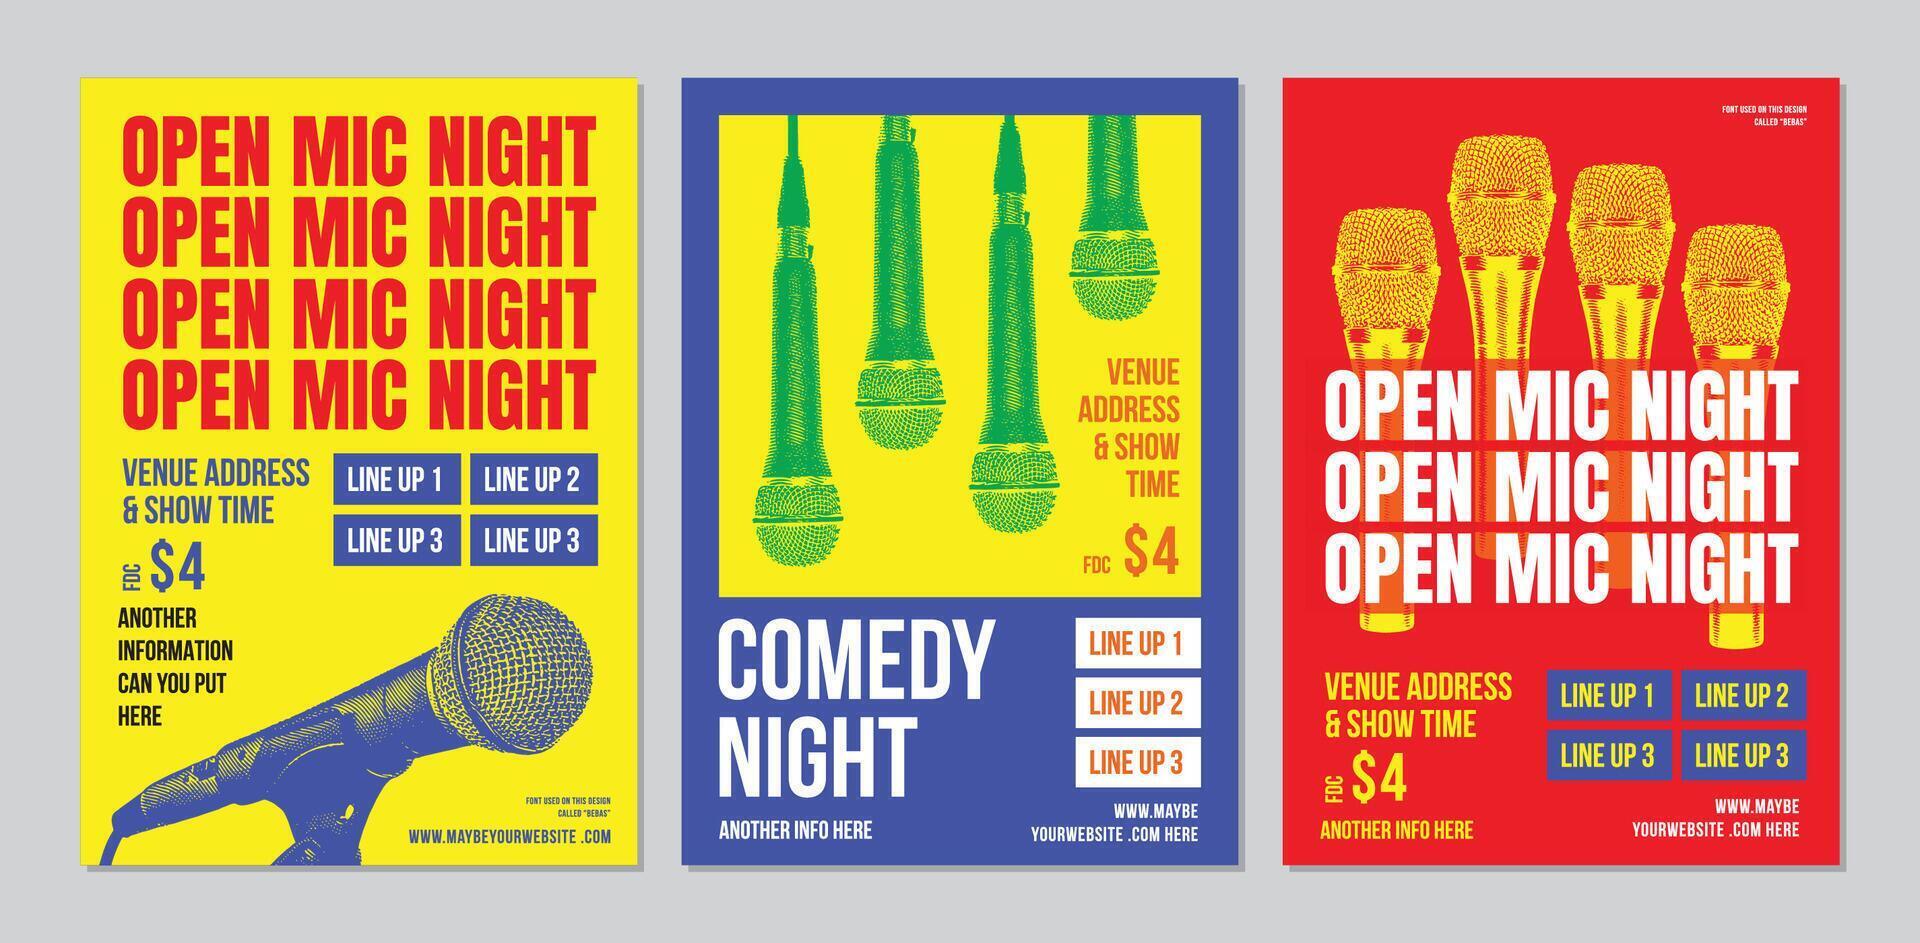 set of Open Mic Night posters, modern and elegant design, indie, live performance comedy show, stand up comedy poster vector